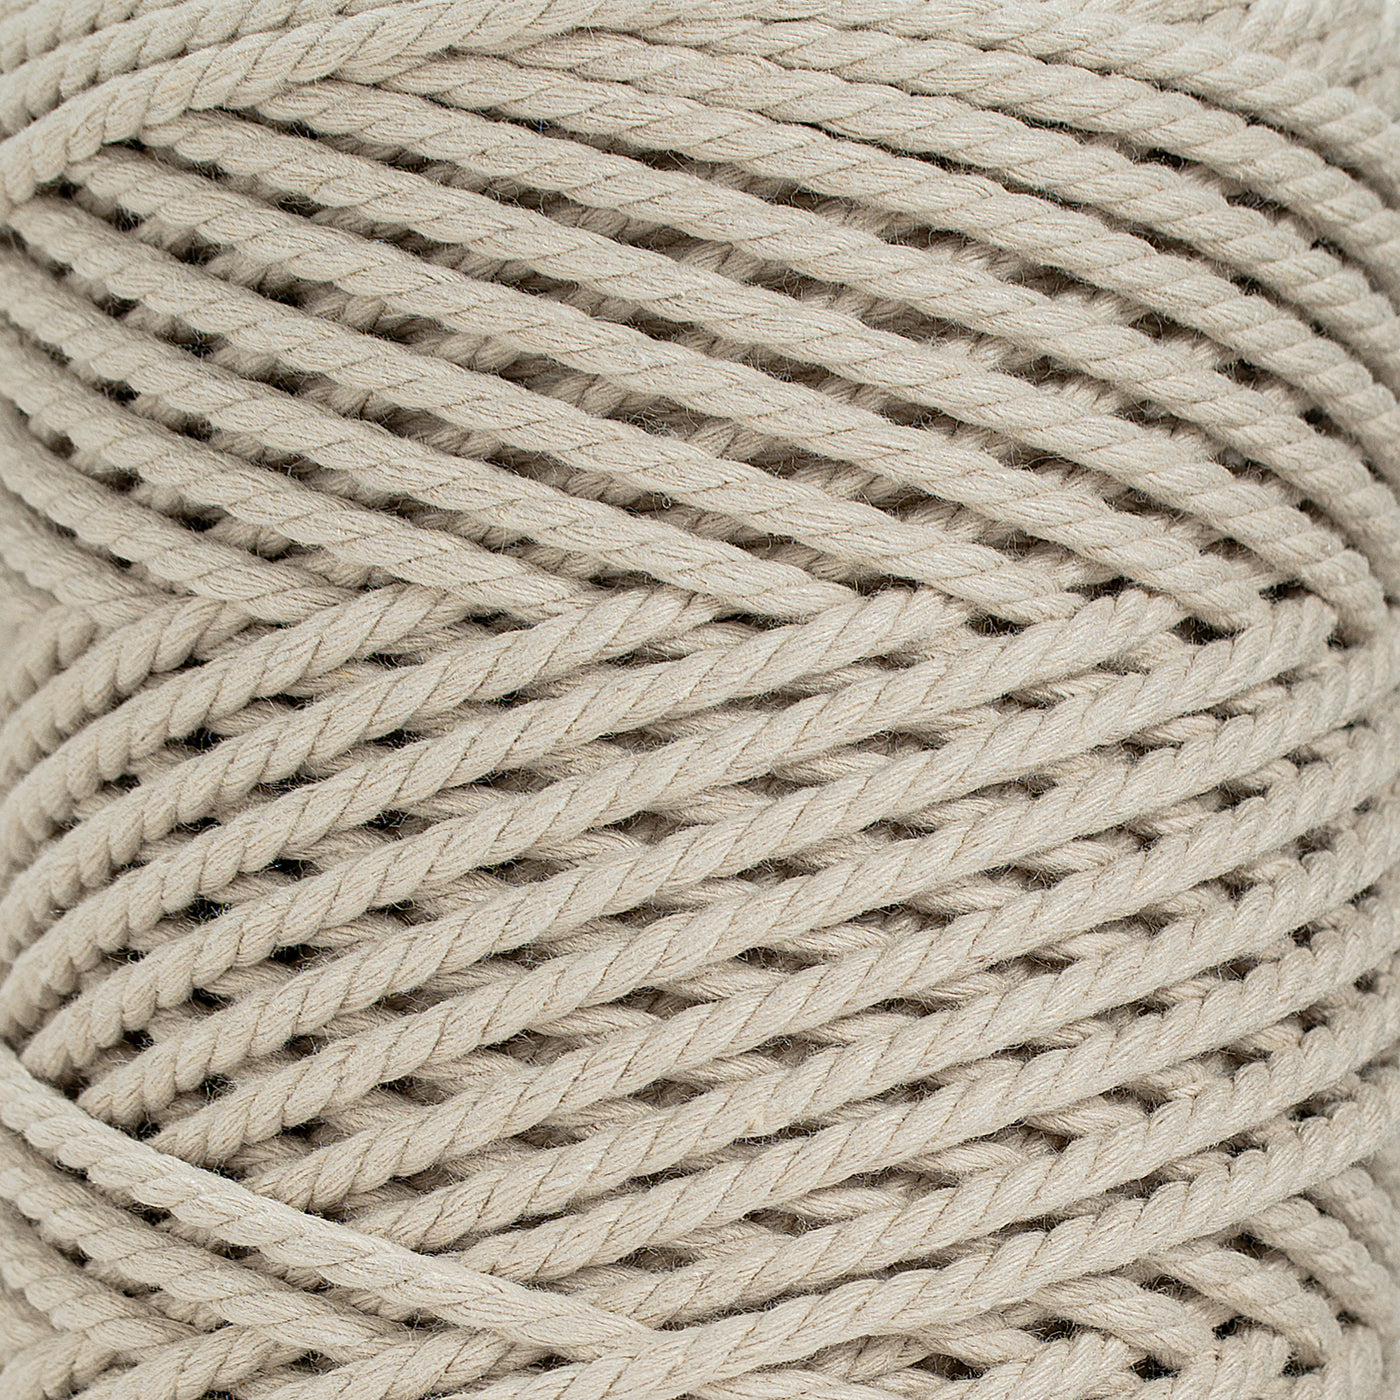 COTTON ROPE ZERO WASTE 3 MM - 3 PLY - MOON COLOR